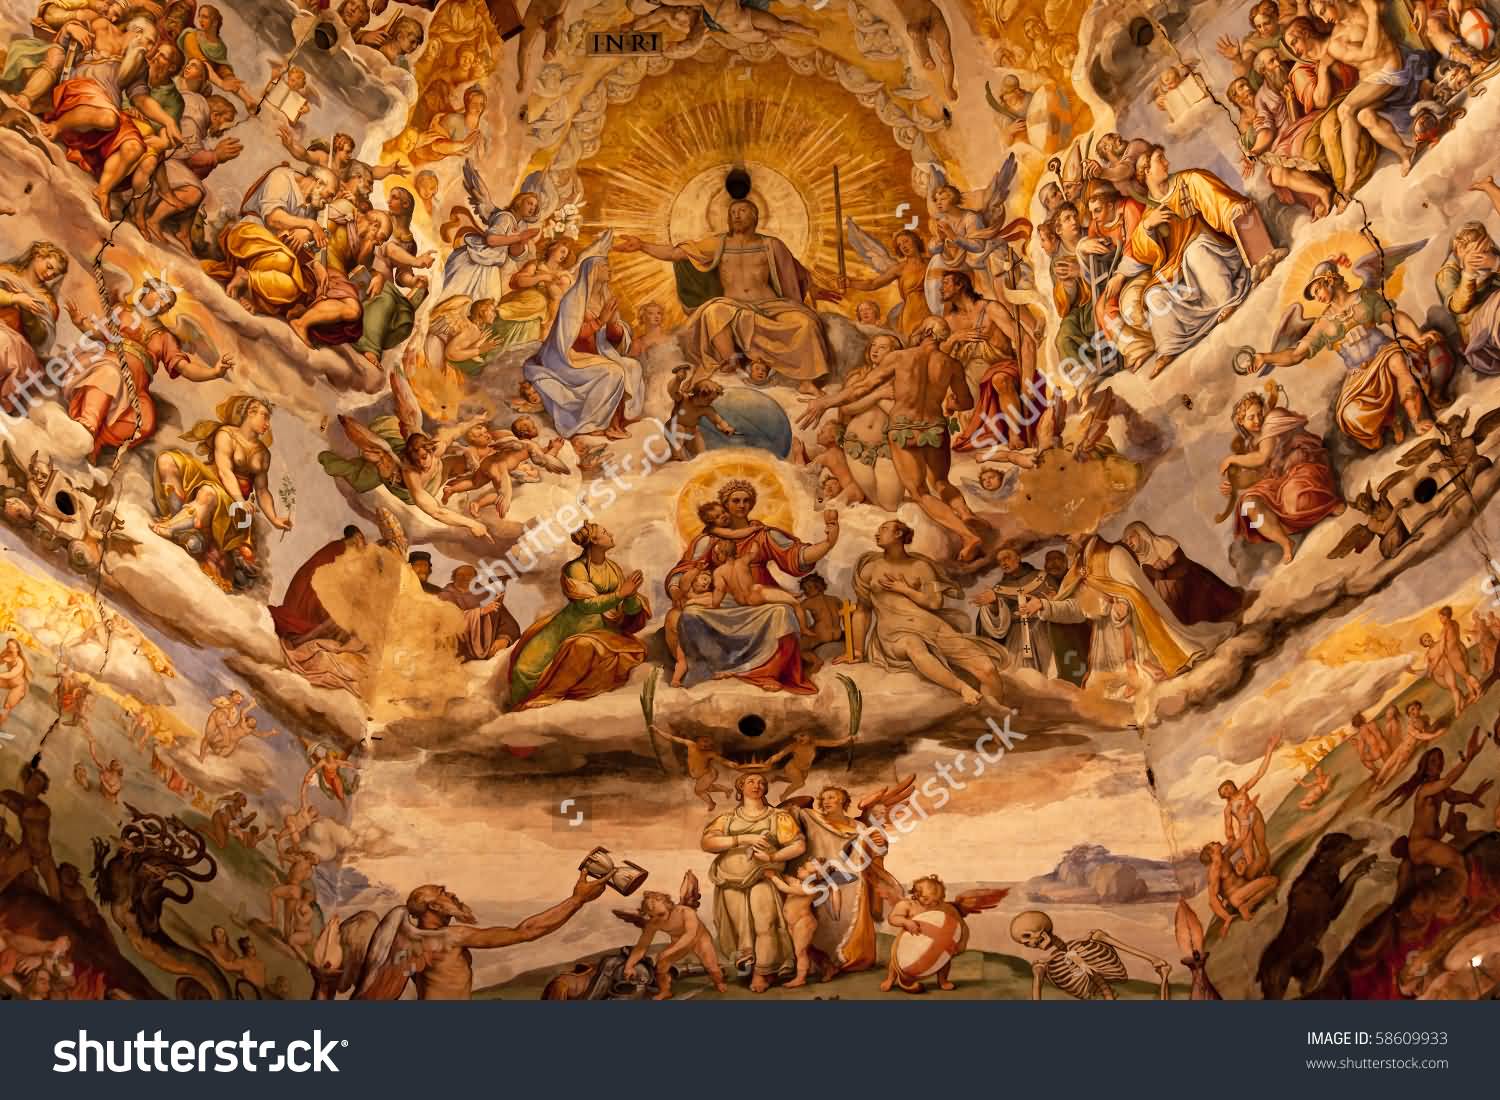 Incredible Paintings Inside The Florence Cathedral In Italy